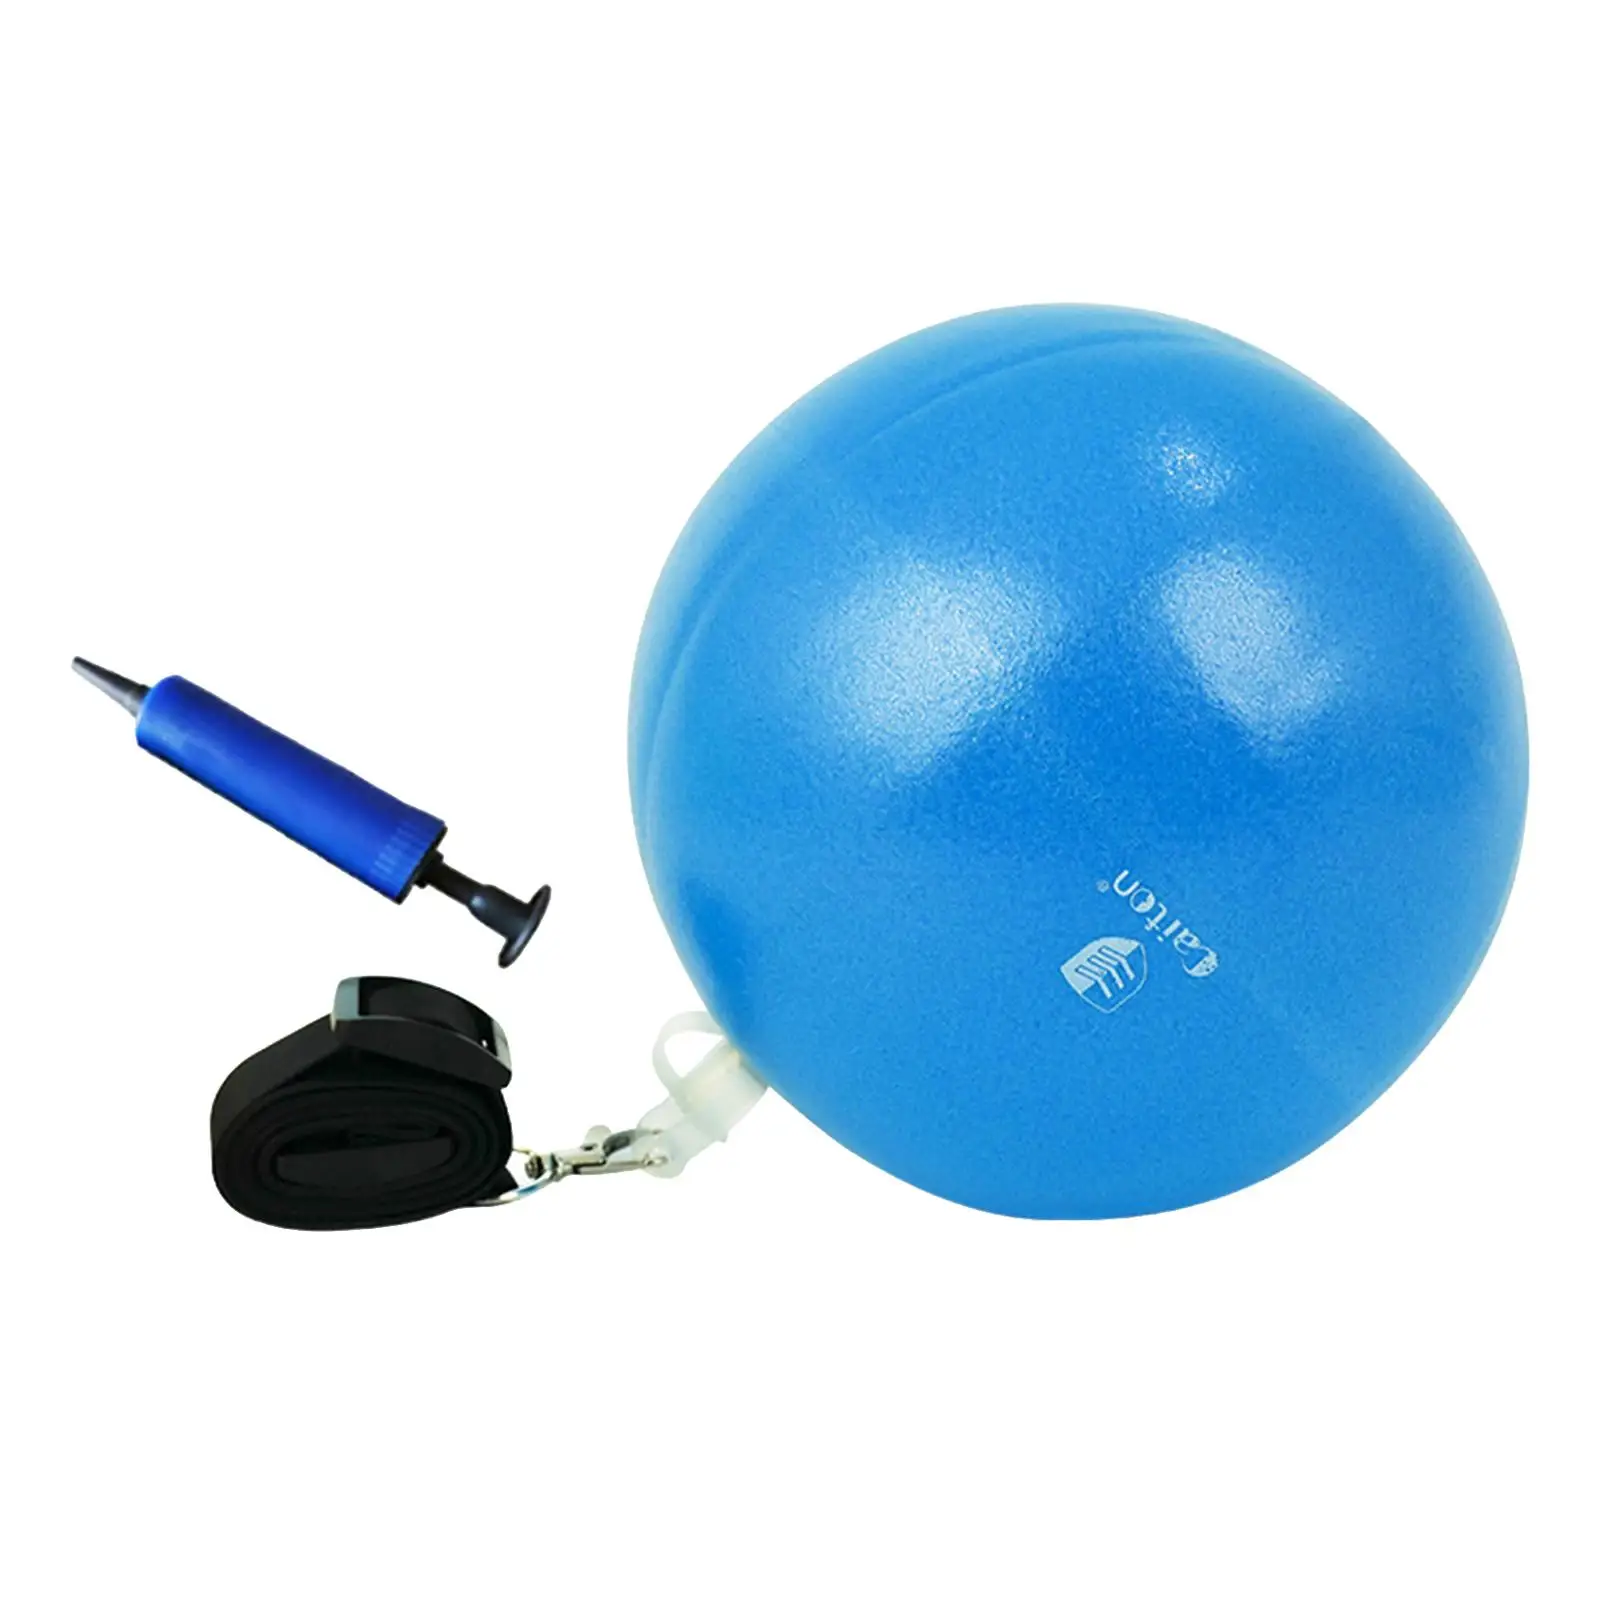 Professional Golf swing Training Aid W/ Adjustable Lanyard Assist Inflatable PVC for Posture Correction Indoor Accessories